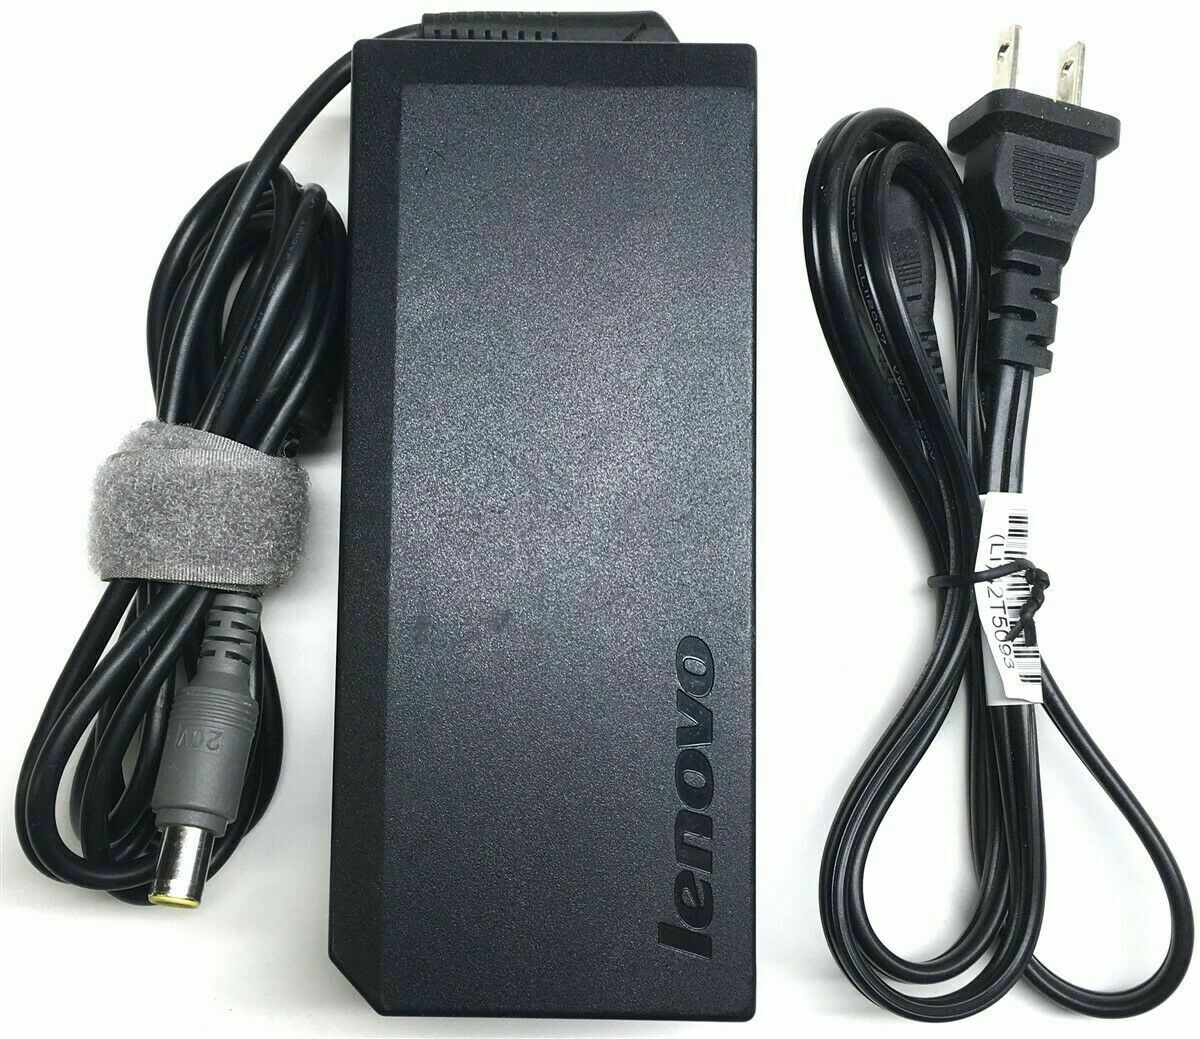 Power Adapter for Halfords Power Pack 100 Powerpack 200 Booster, 5.5*2.5 Charger/ Power Adapter for 12v Car/ Van/ Cara - Click Image to Close